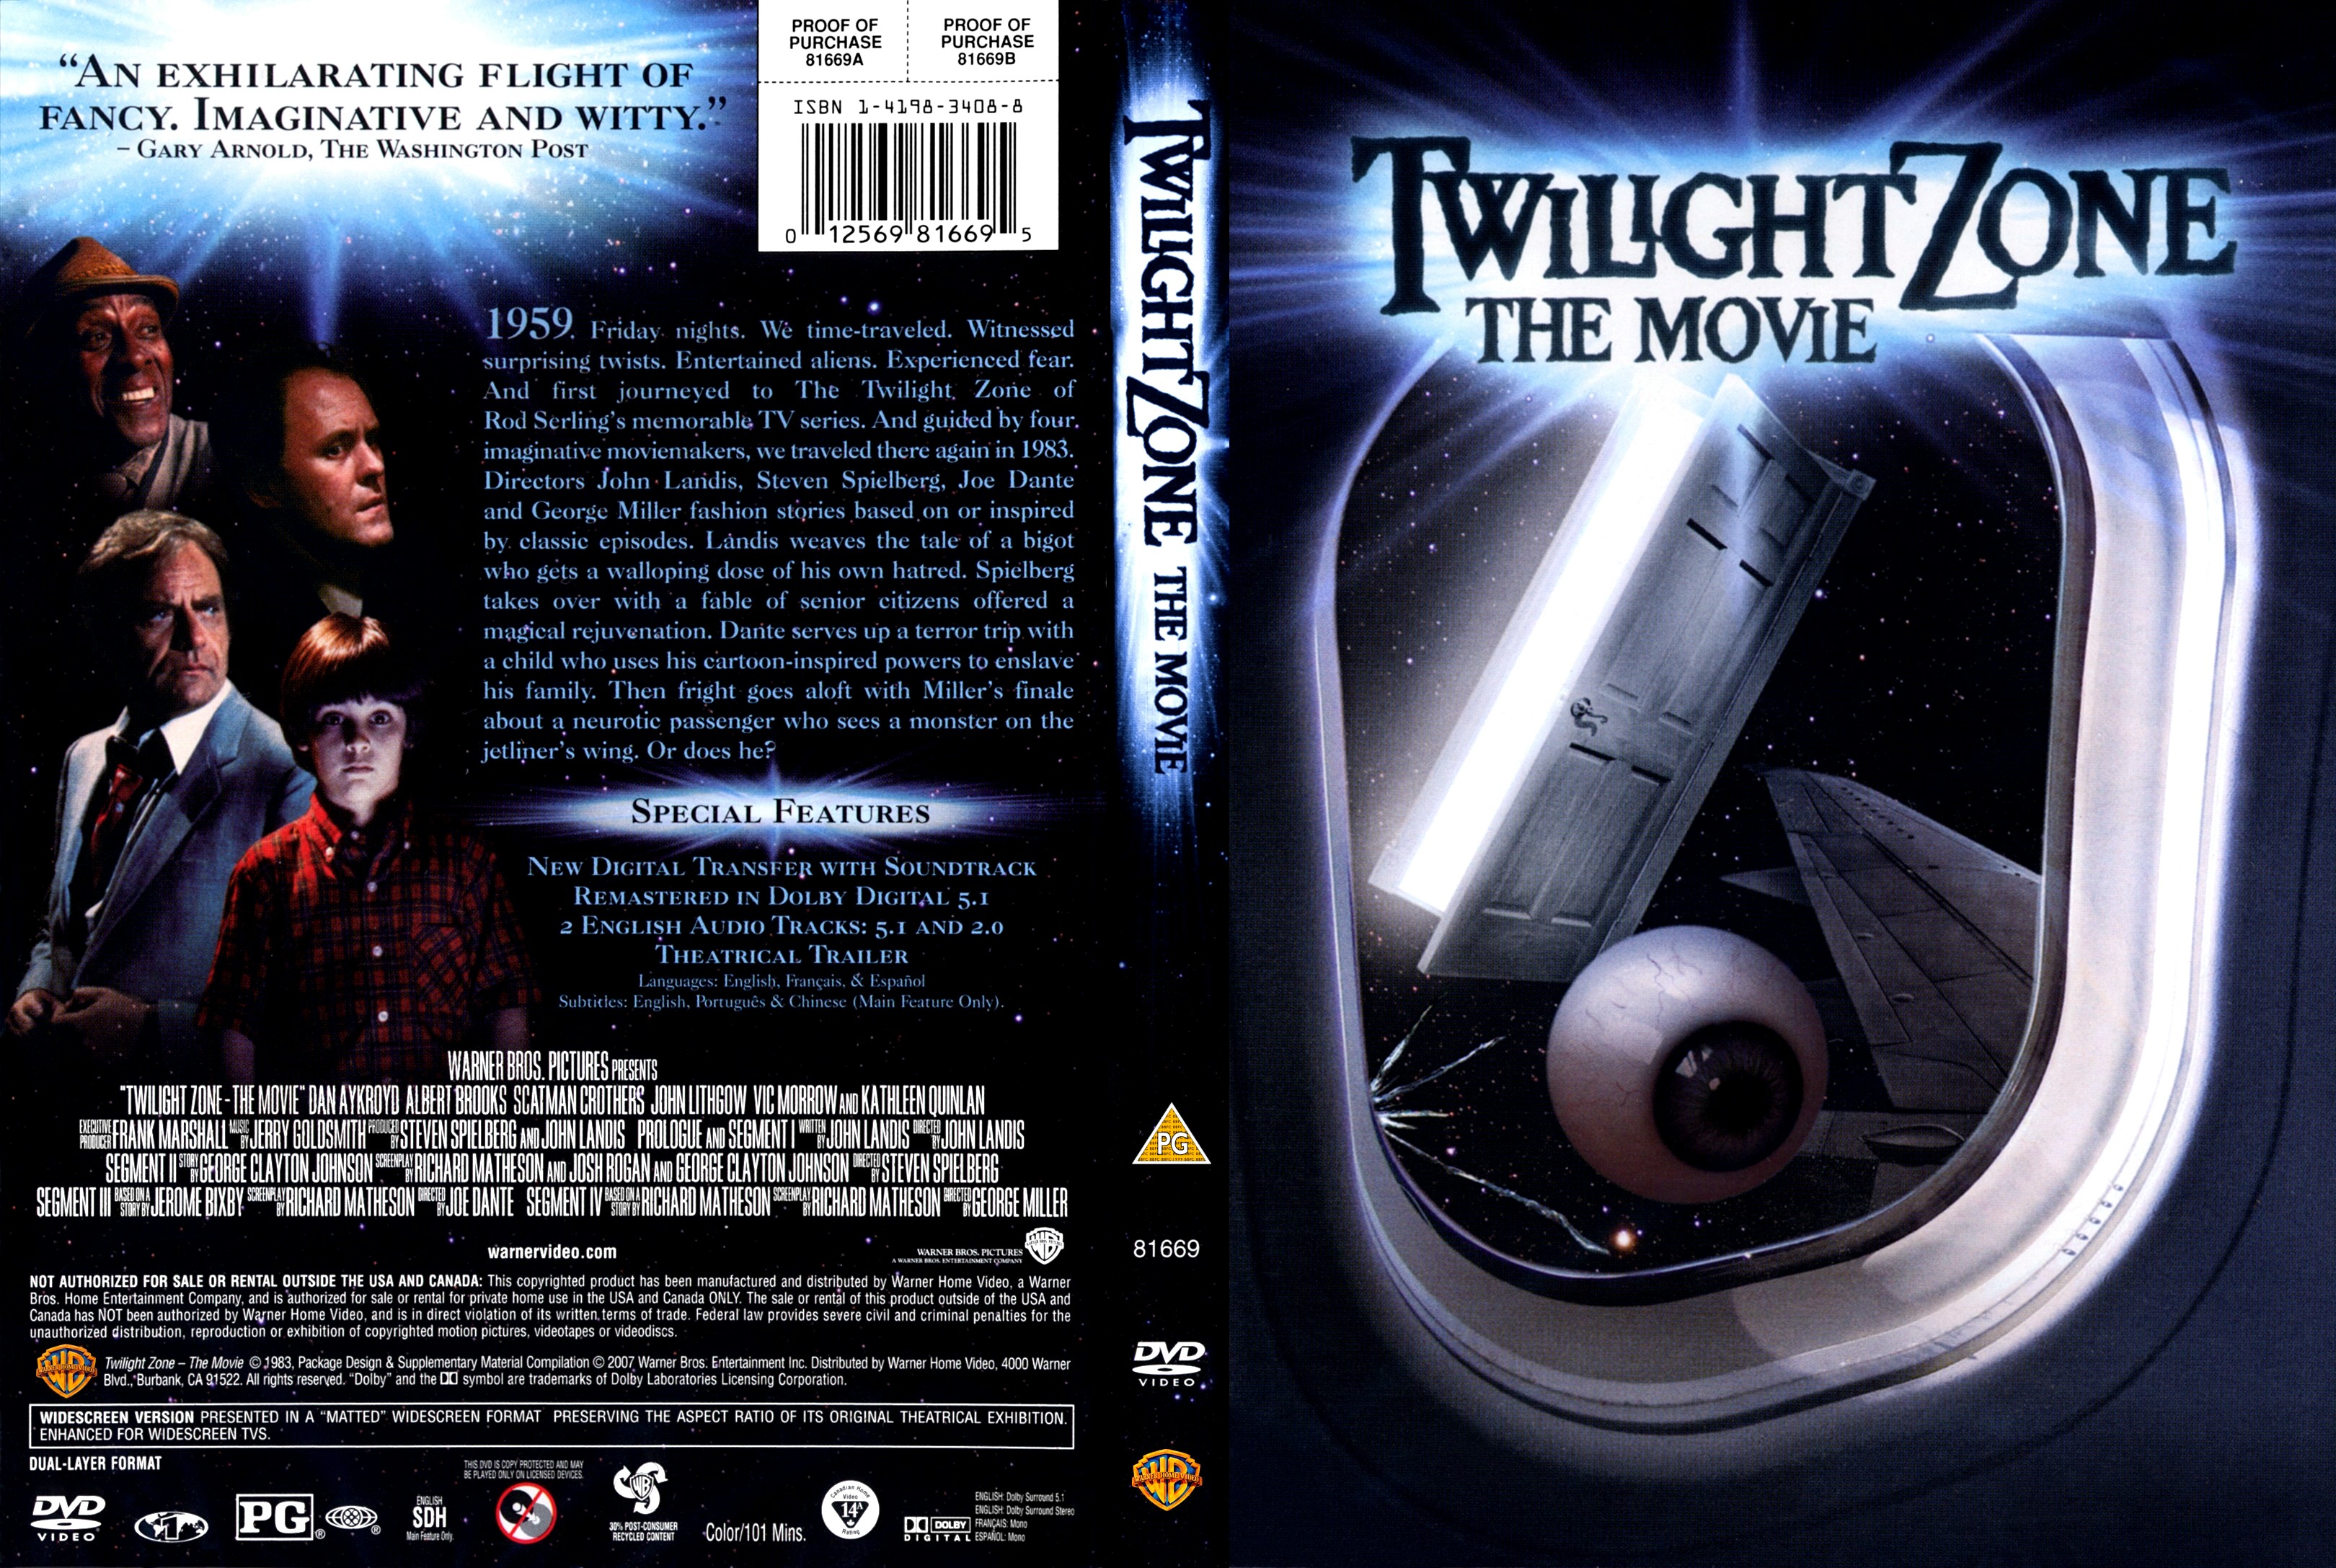 Download Twilight Zone The Movie 1983 Full Hd Quality